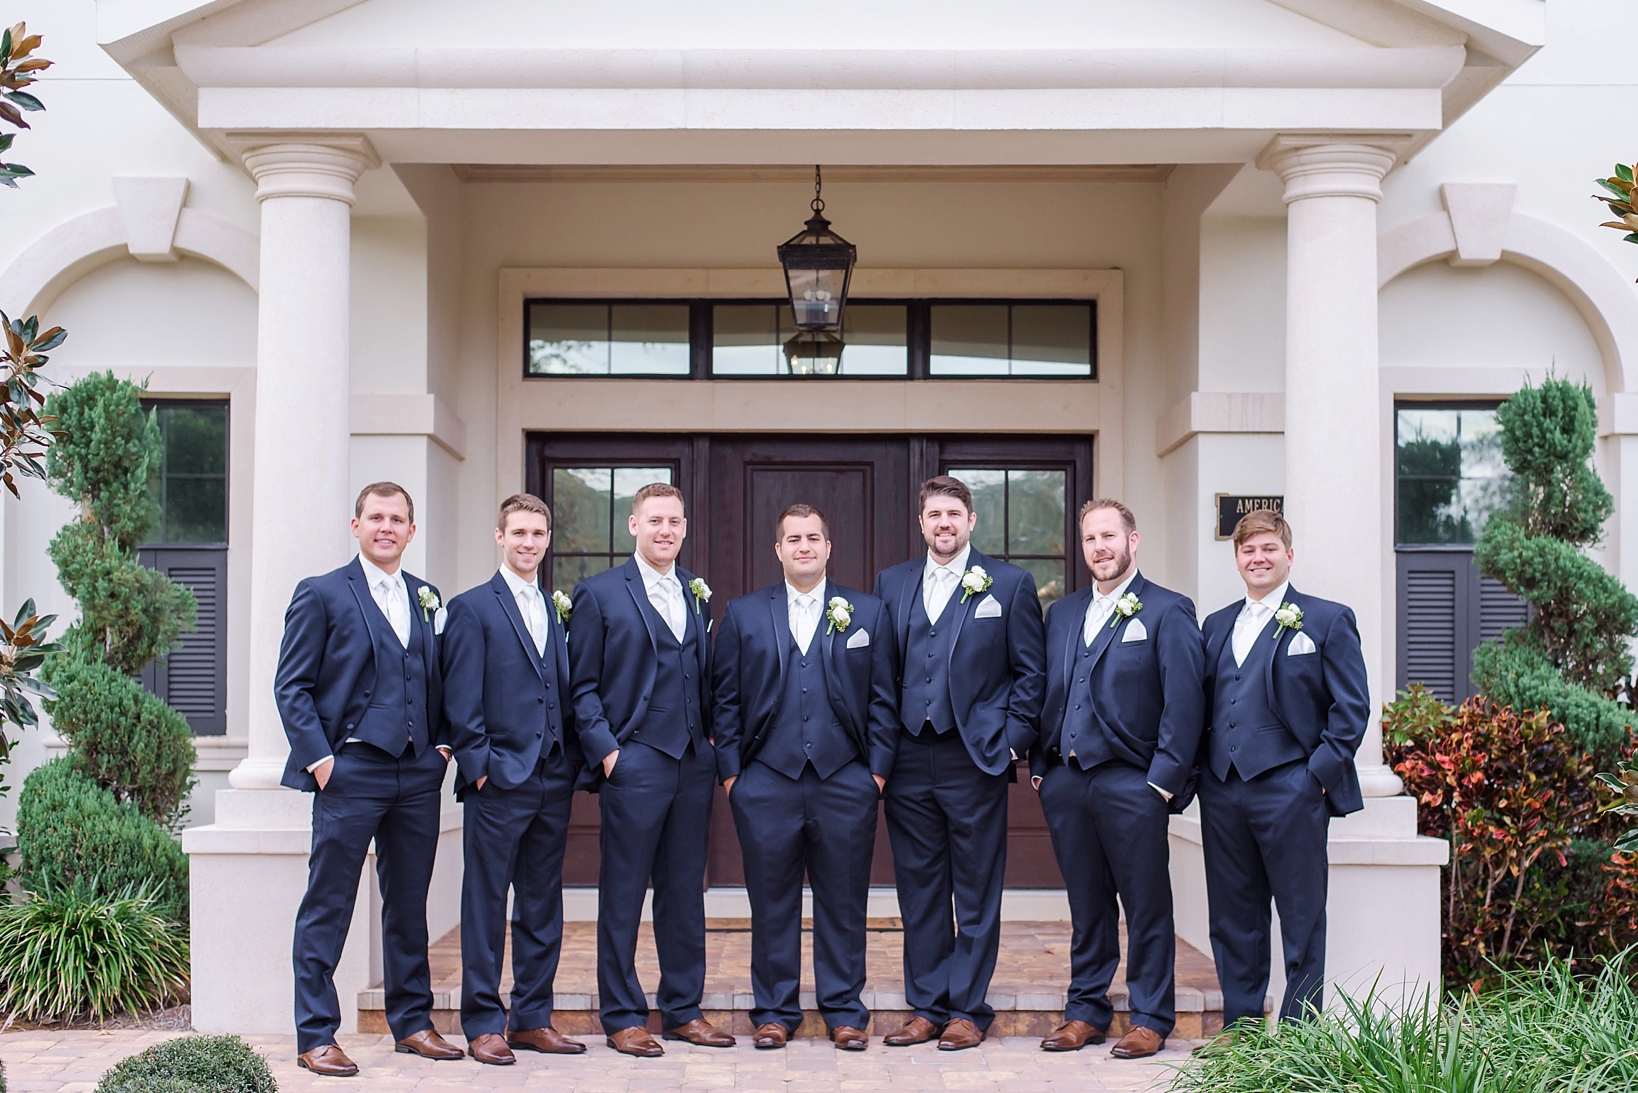 Groom with his Groomsmen in a traditional portrait